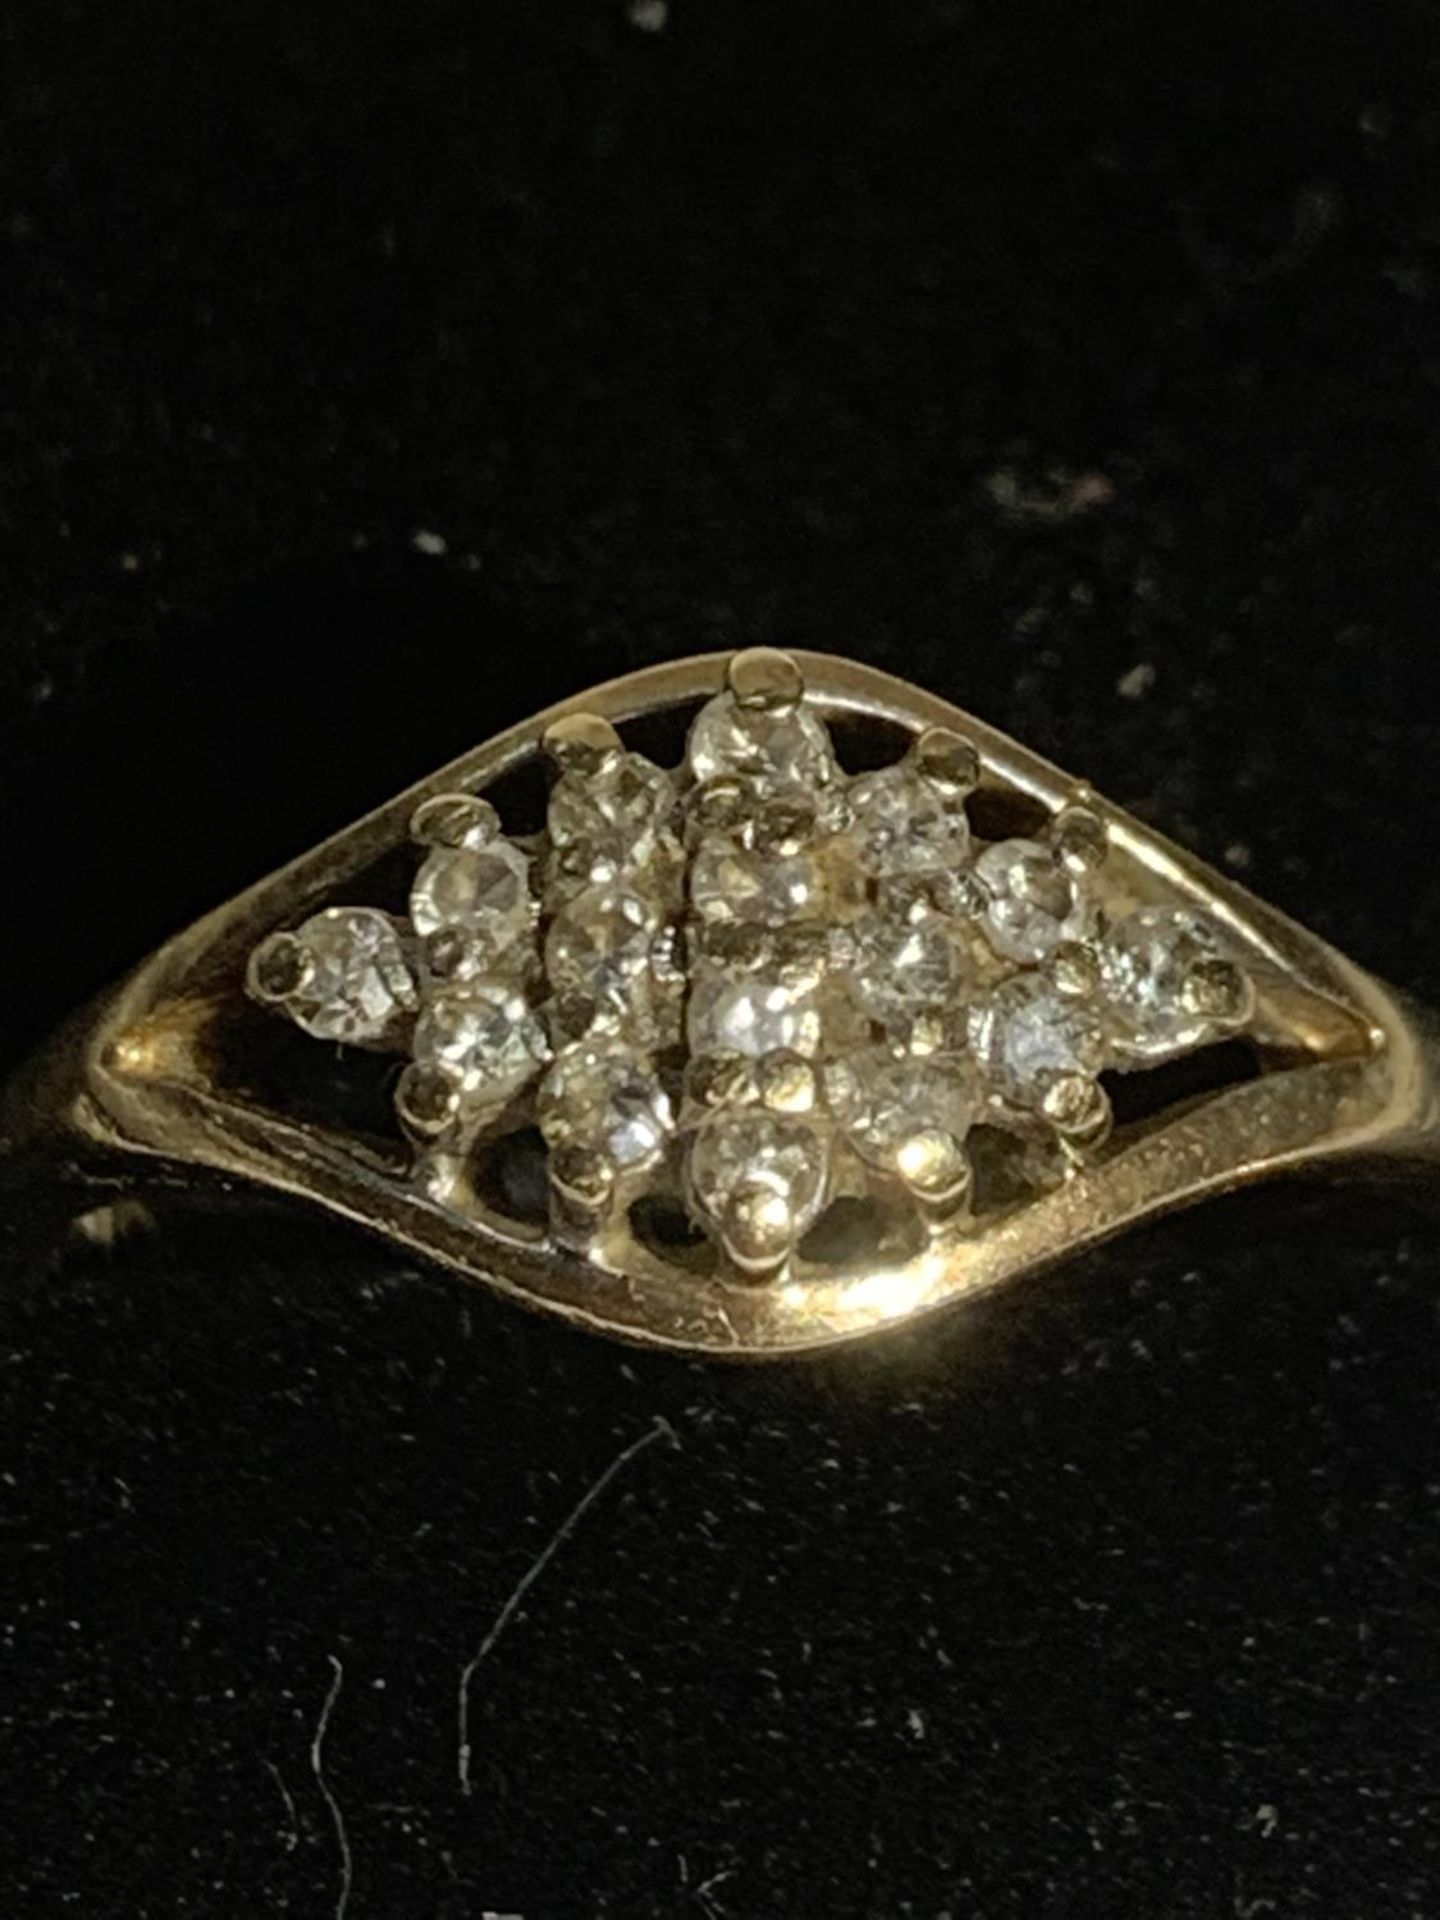 A 9 CARAT GOLD RING WITH SMALL CLEAR STONES IN A DIAMOND DESIGN SIZE N GROSS WEIGHT 2.3 GRAMS